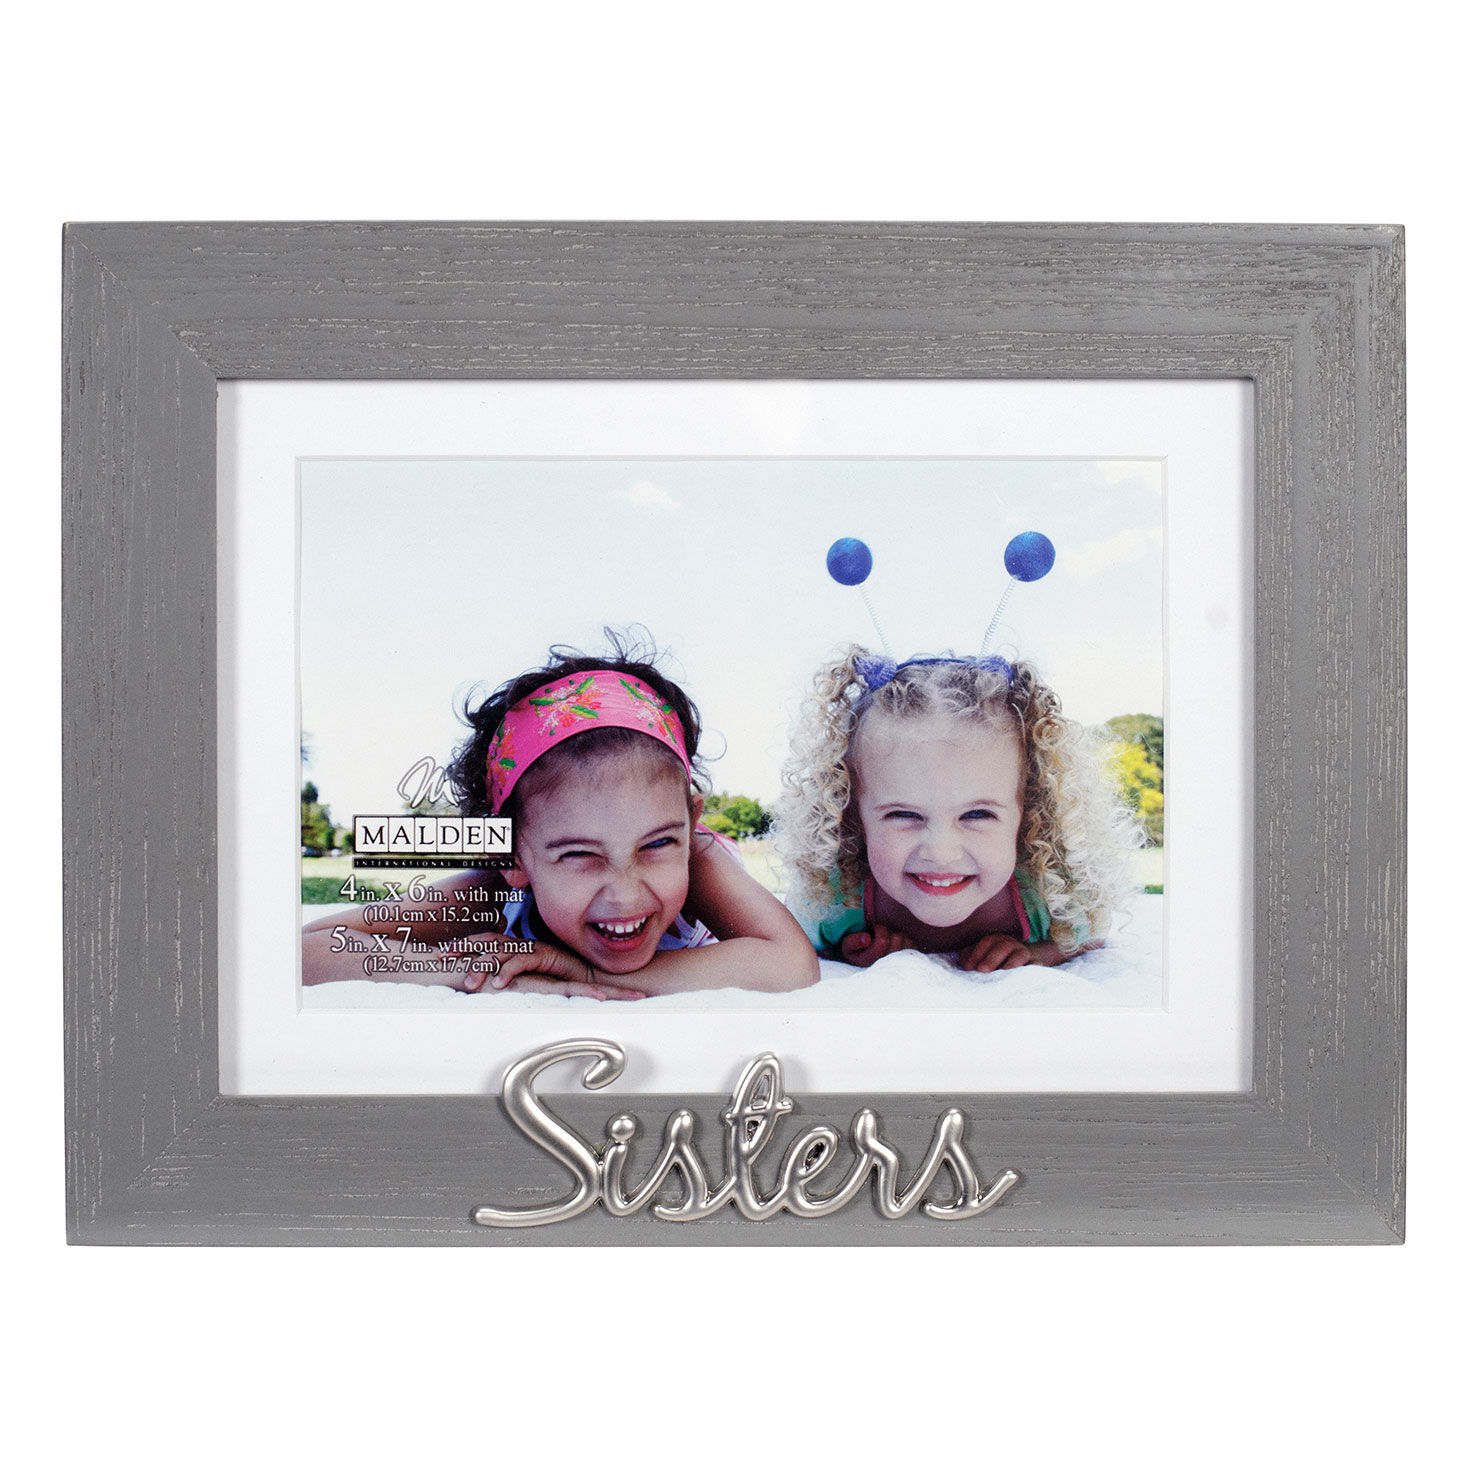 https://www.hallmark.com/dw/image/v2/AALB_PRD/on/demandware.static/-/Sites-hallmark-master/default/dw797a0ecb/images/finished-goods/products/332346/Sisters-Gray-Wood-Matted-Picture-Frame_332346_01.jpg?sfrm=jpg